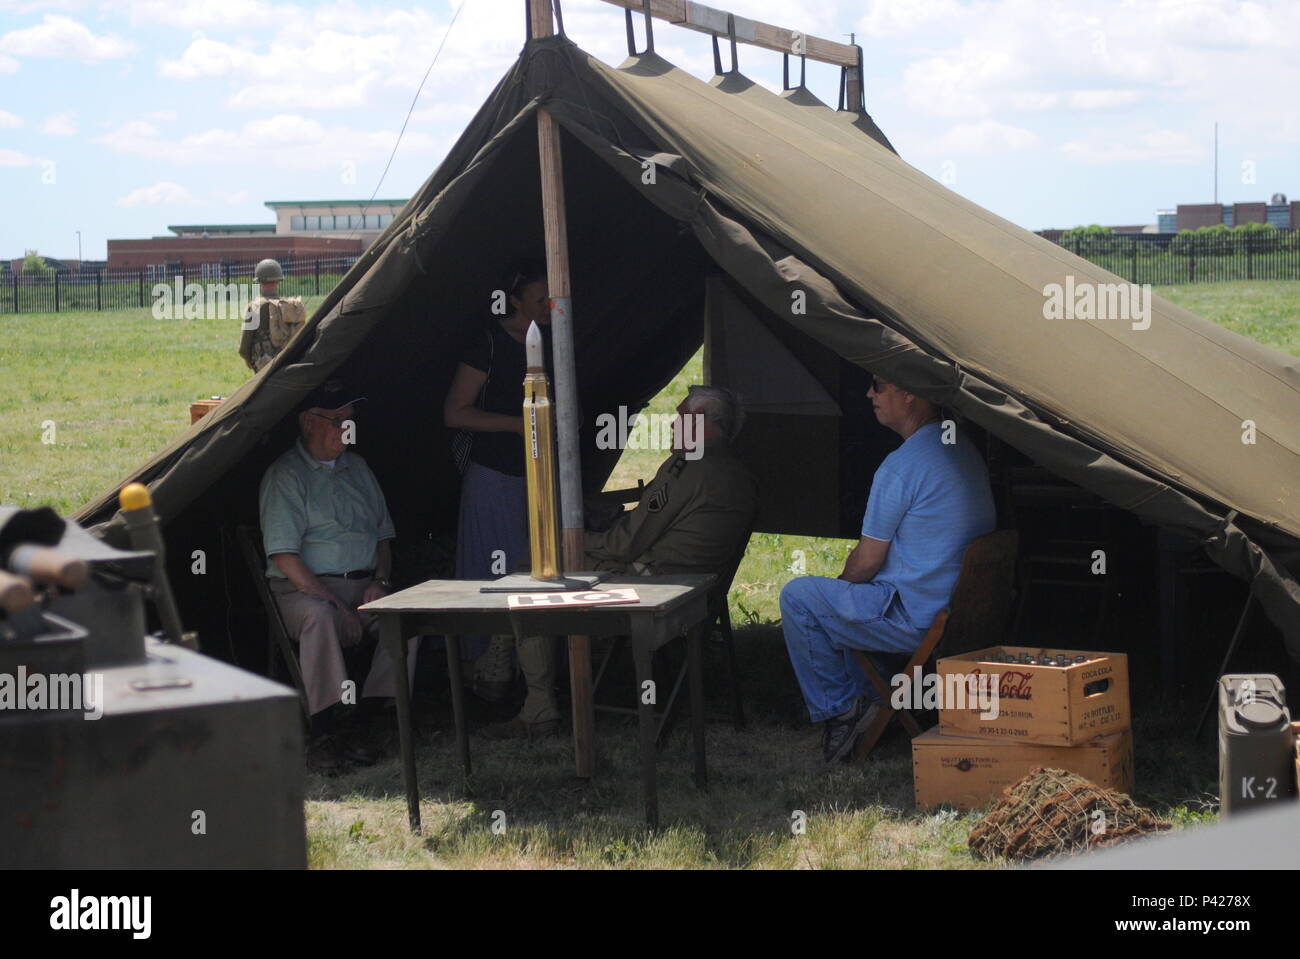 FORT CARSON, Colorado – Bob Burrow (left), a World War II veteran who served with 2nd Battalion, 317th Infantry Regiment, 80th Infantry Division, attended the 4th Infantry Division Museum reopening and Living History Day event, held outside Fort Carson’s Gate 1, June 4, 2016.  Burrows, shaded in a military tent display, shared his recollection of the 4th Infantry Division with the Soldiers and community members also in attendance of the event.  (U.S. Army photo by Capt. Shaun T. Manley, 3rd ABCT Public Affairs, 4th Inf. Div.) Stock Photo